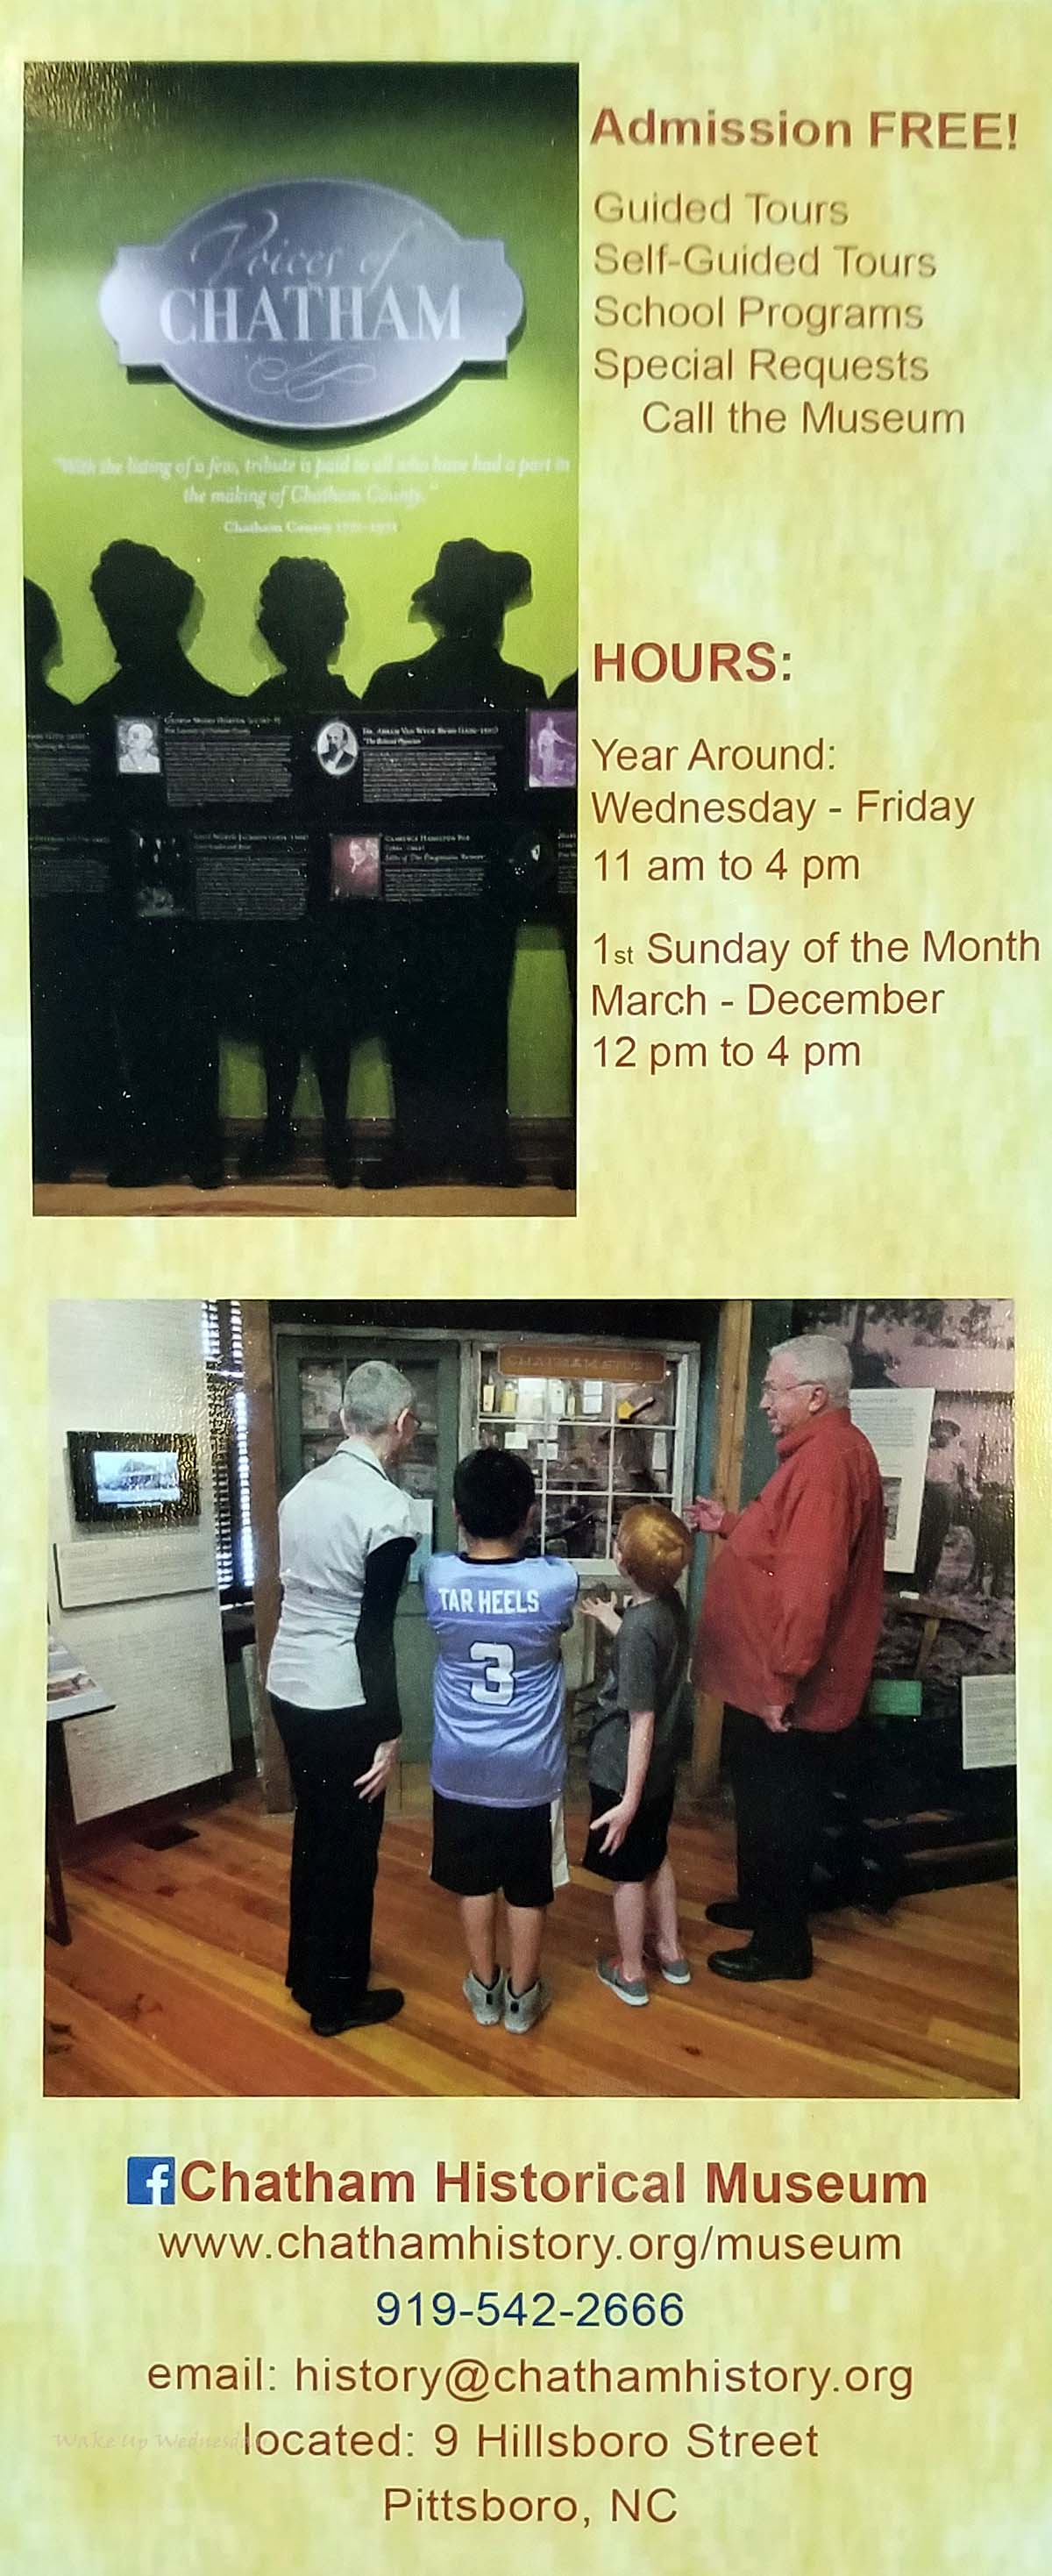 Chatham Historical Museum information.